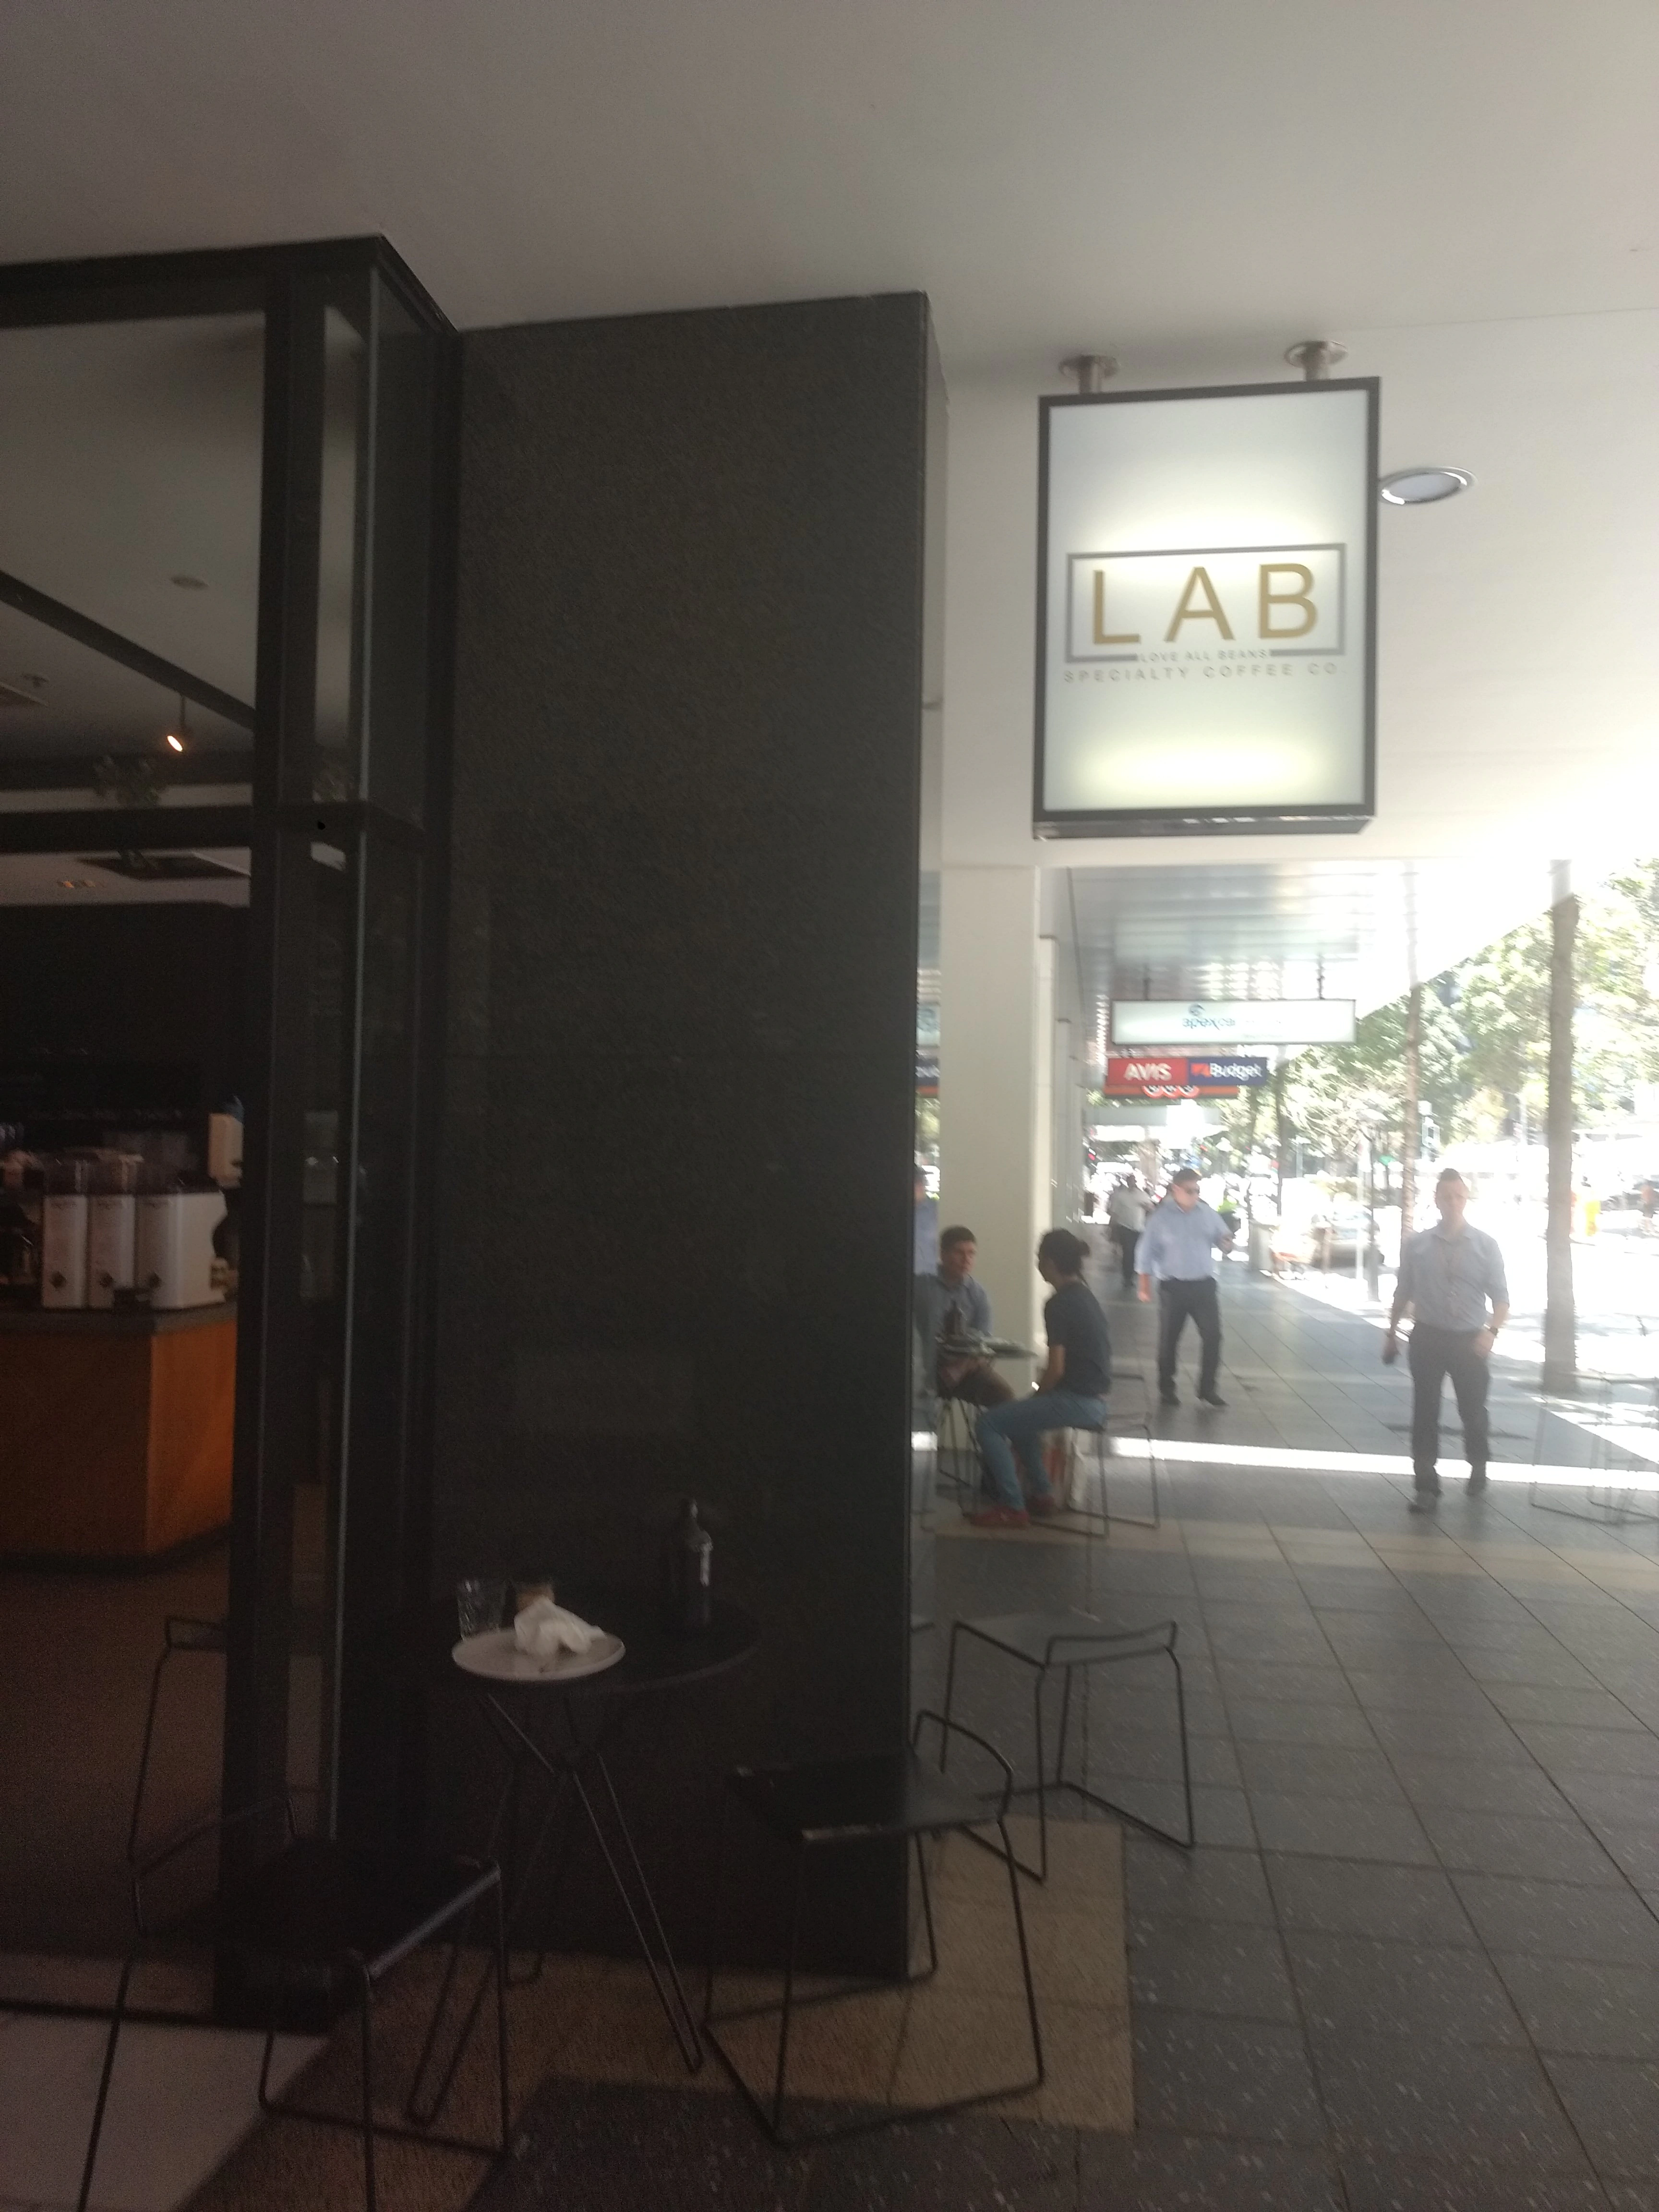 LAB Specialty Coffee Co.